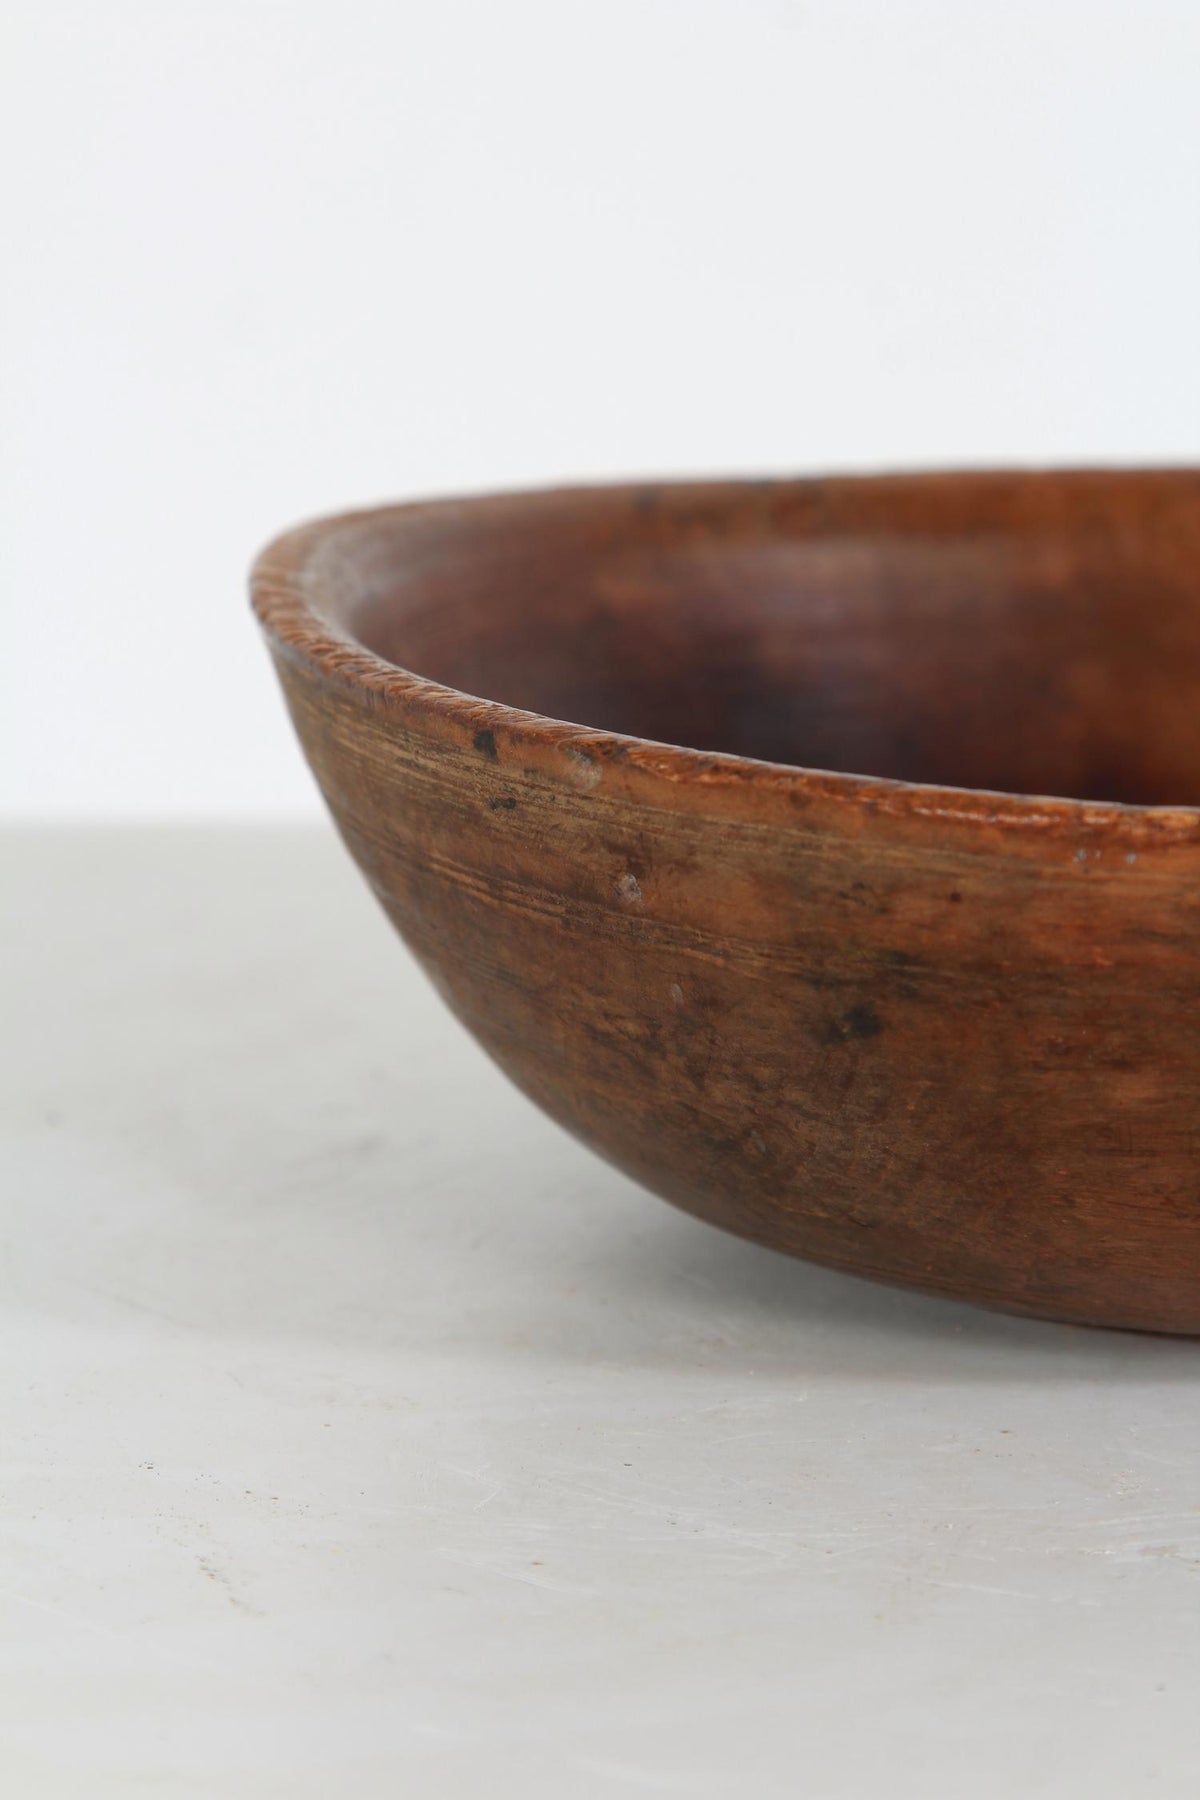 A vERY Appealing  Small Antique Swedish Root Wood Diary Bowl